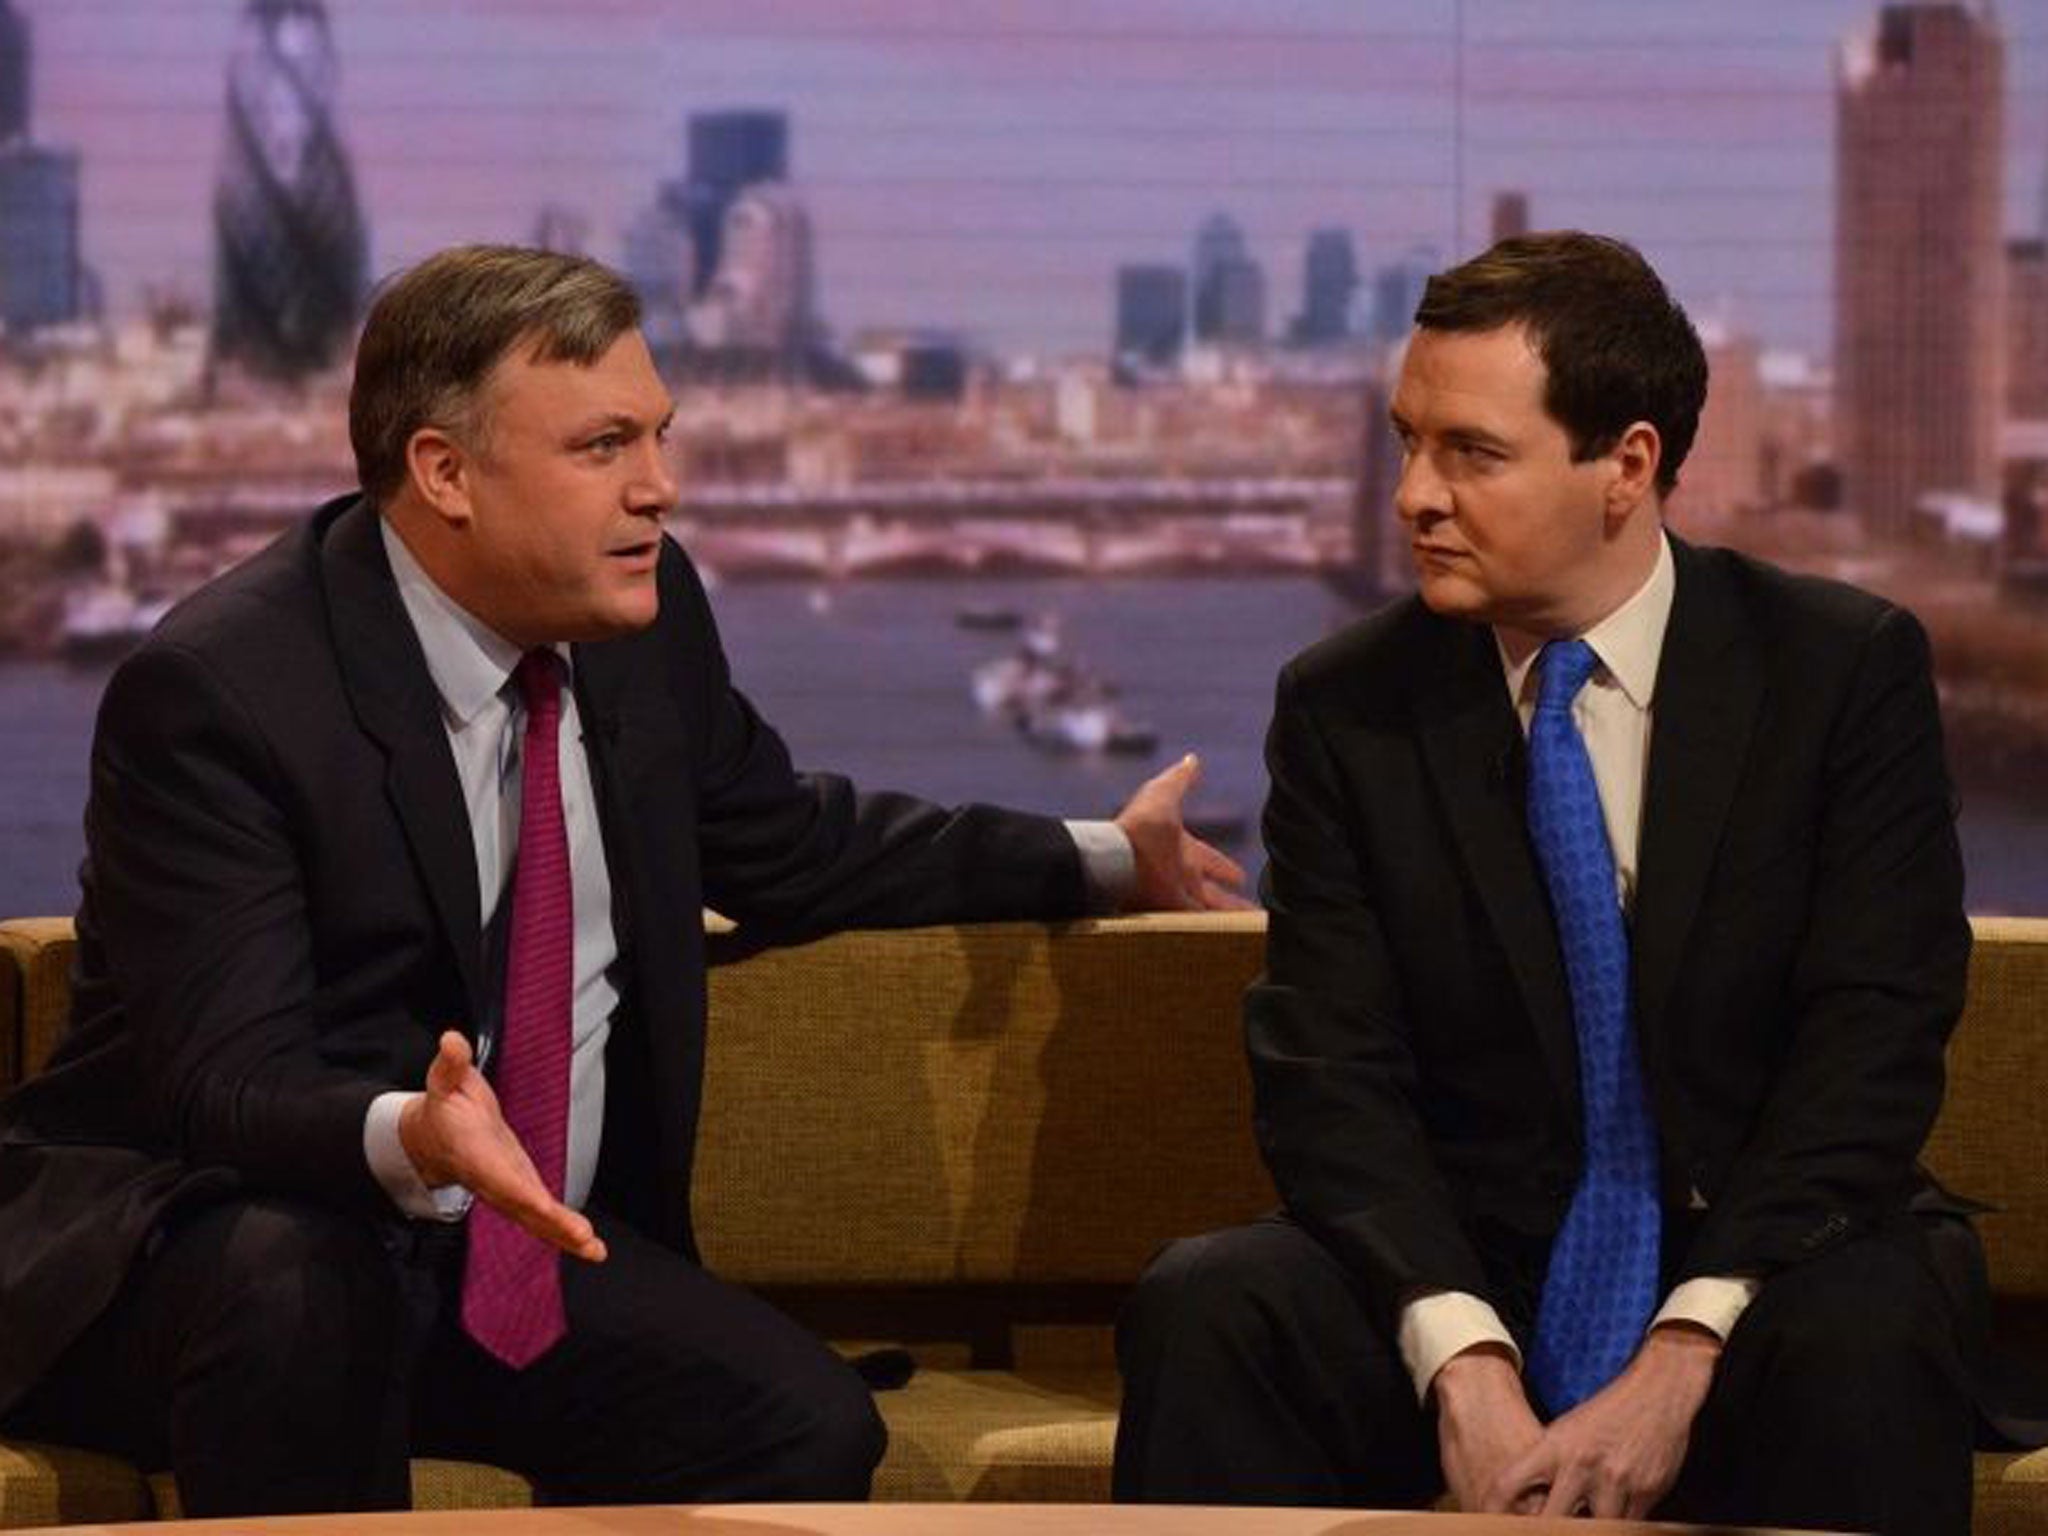 Ed Balls and George Osborne are both disliked by the public